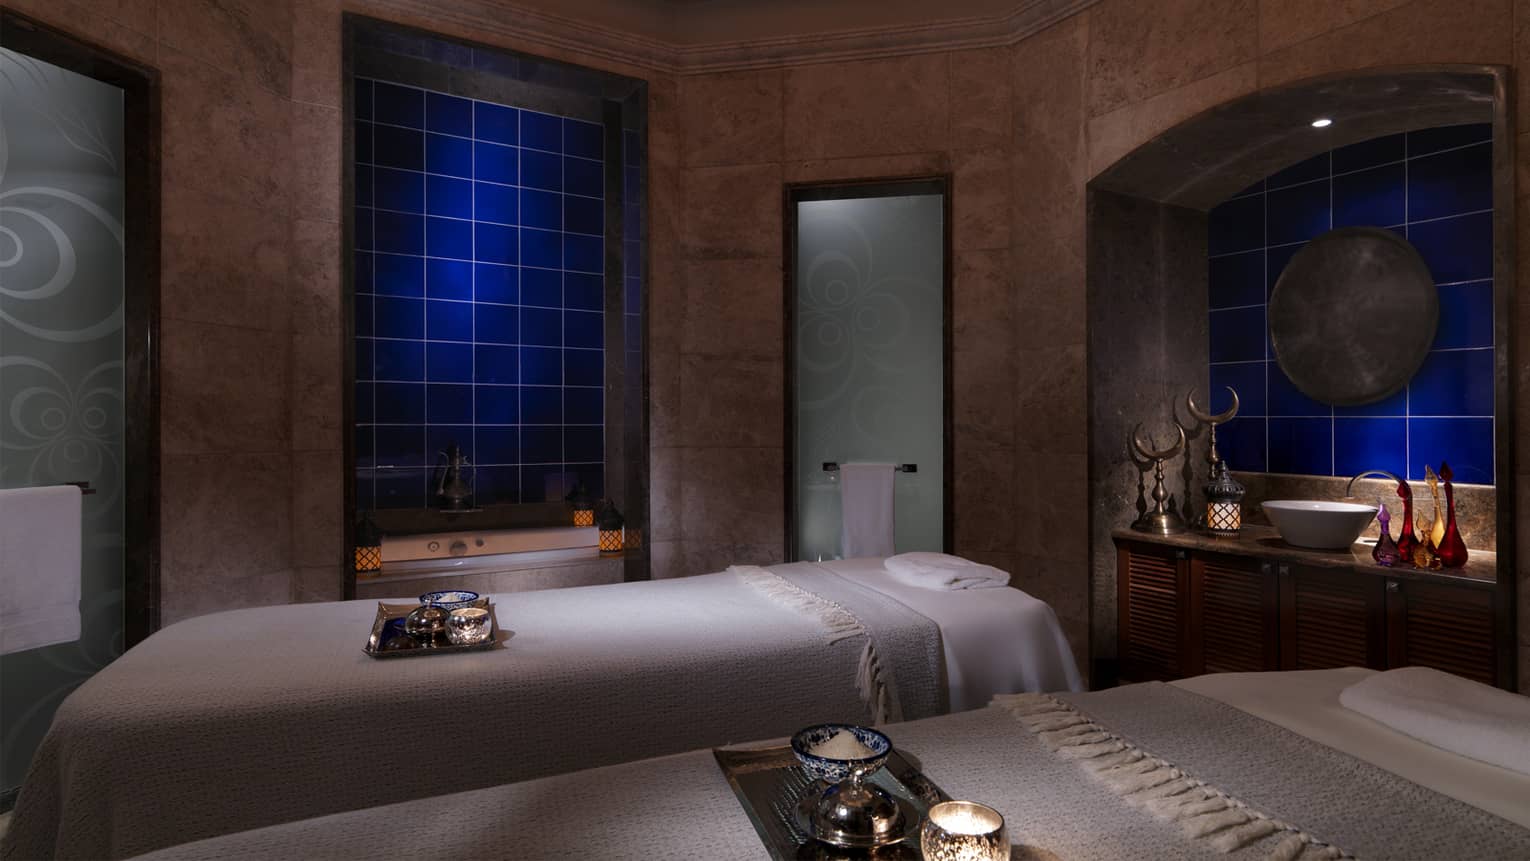 Couples massage beds in dimly lit spa treatment room with candles